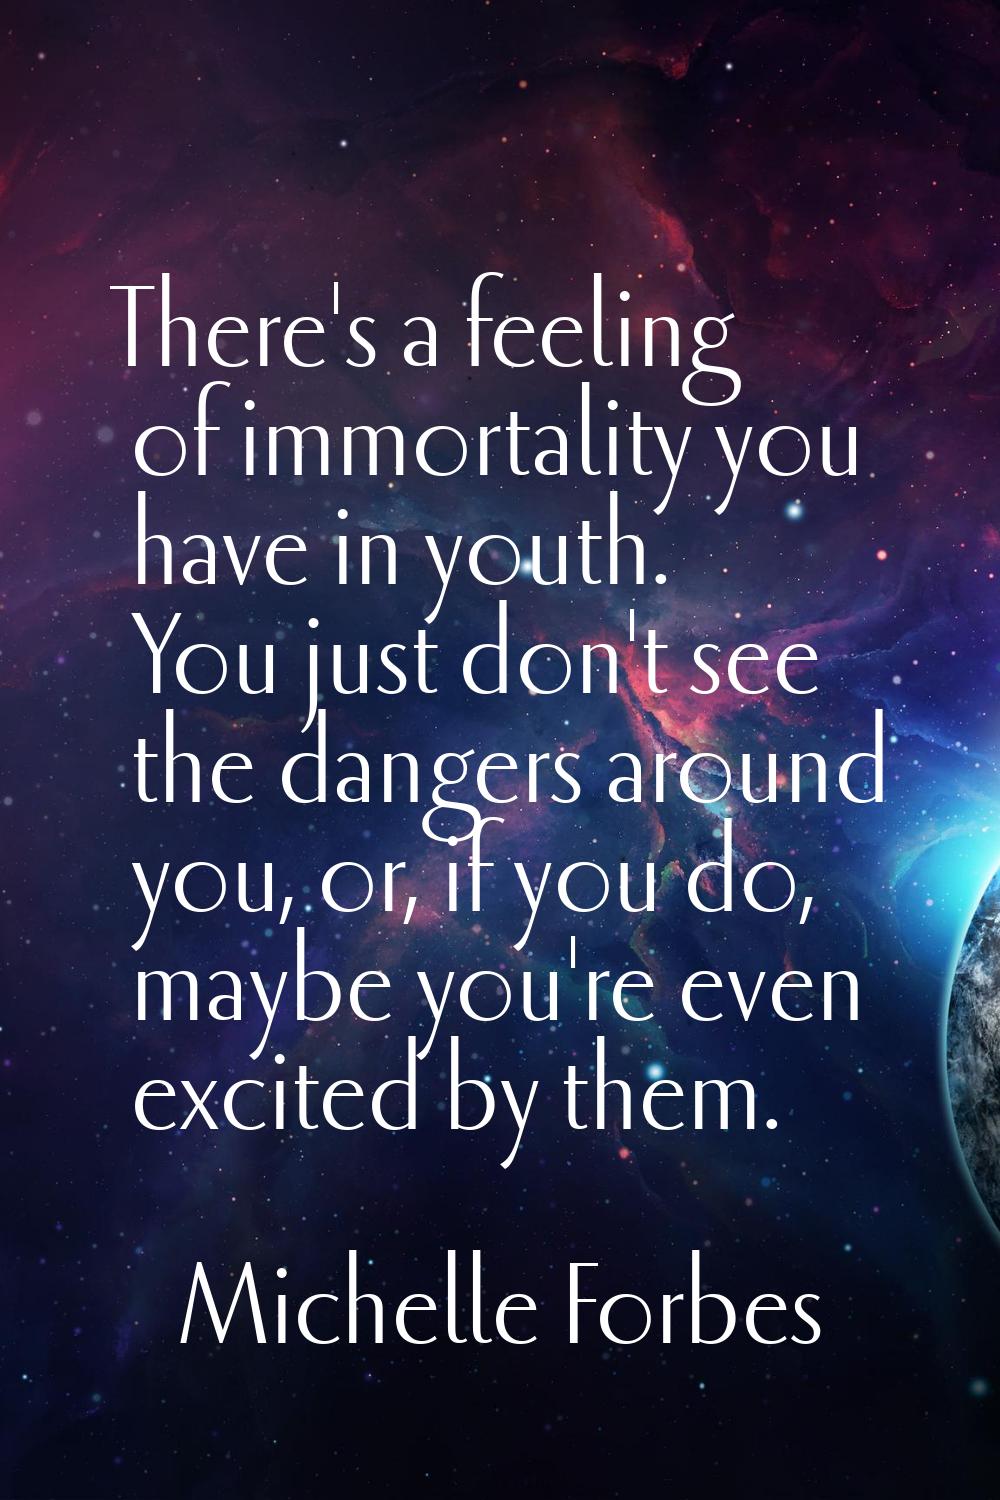 There's a feeling of immortality you have in youth. You just don't see the dangers around you, or, 